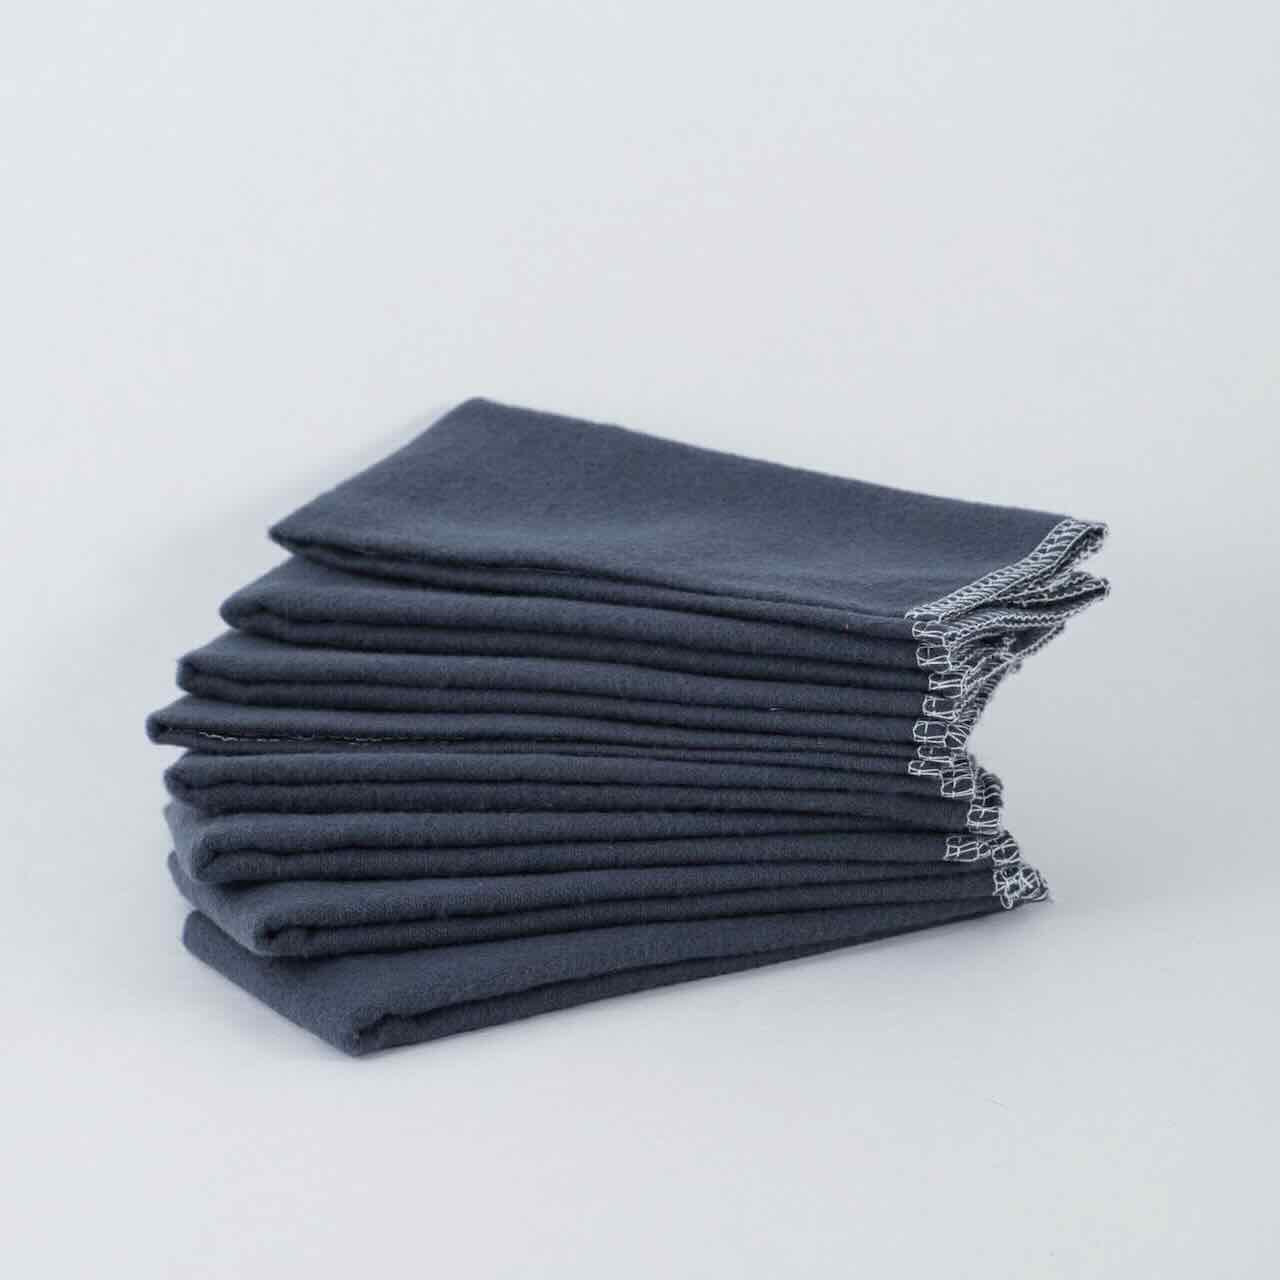 cheeks ahoy charcoal unpaper towels set of 8 on top of a plain table top without packaging.